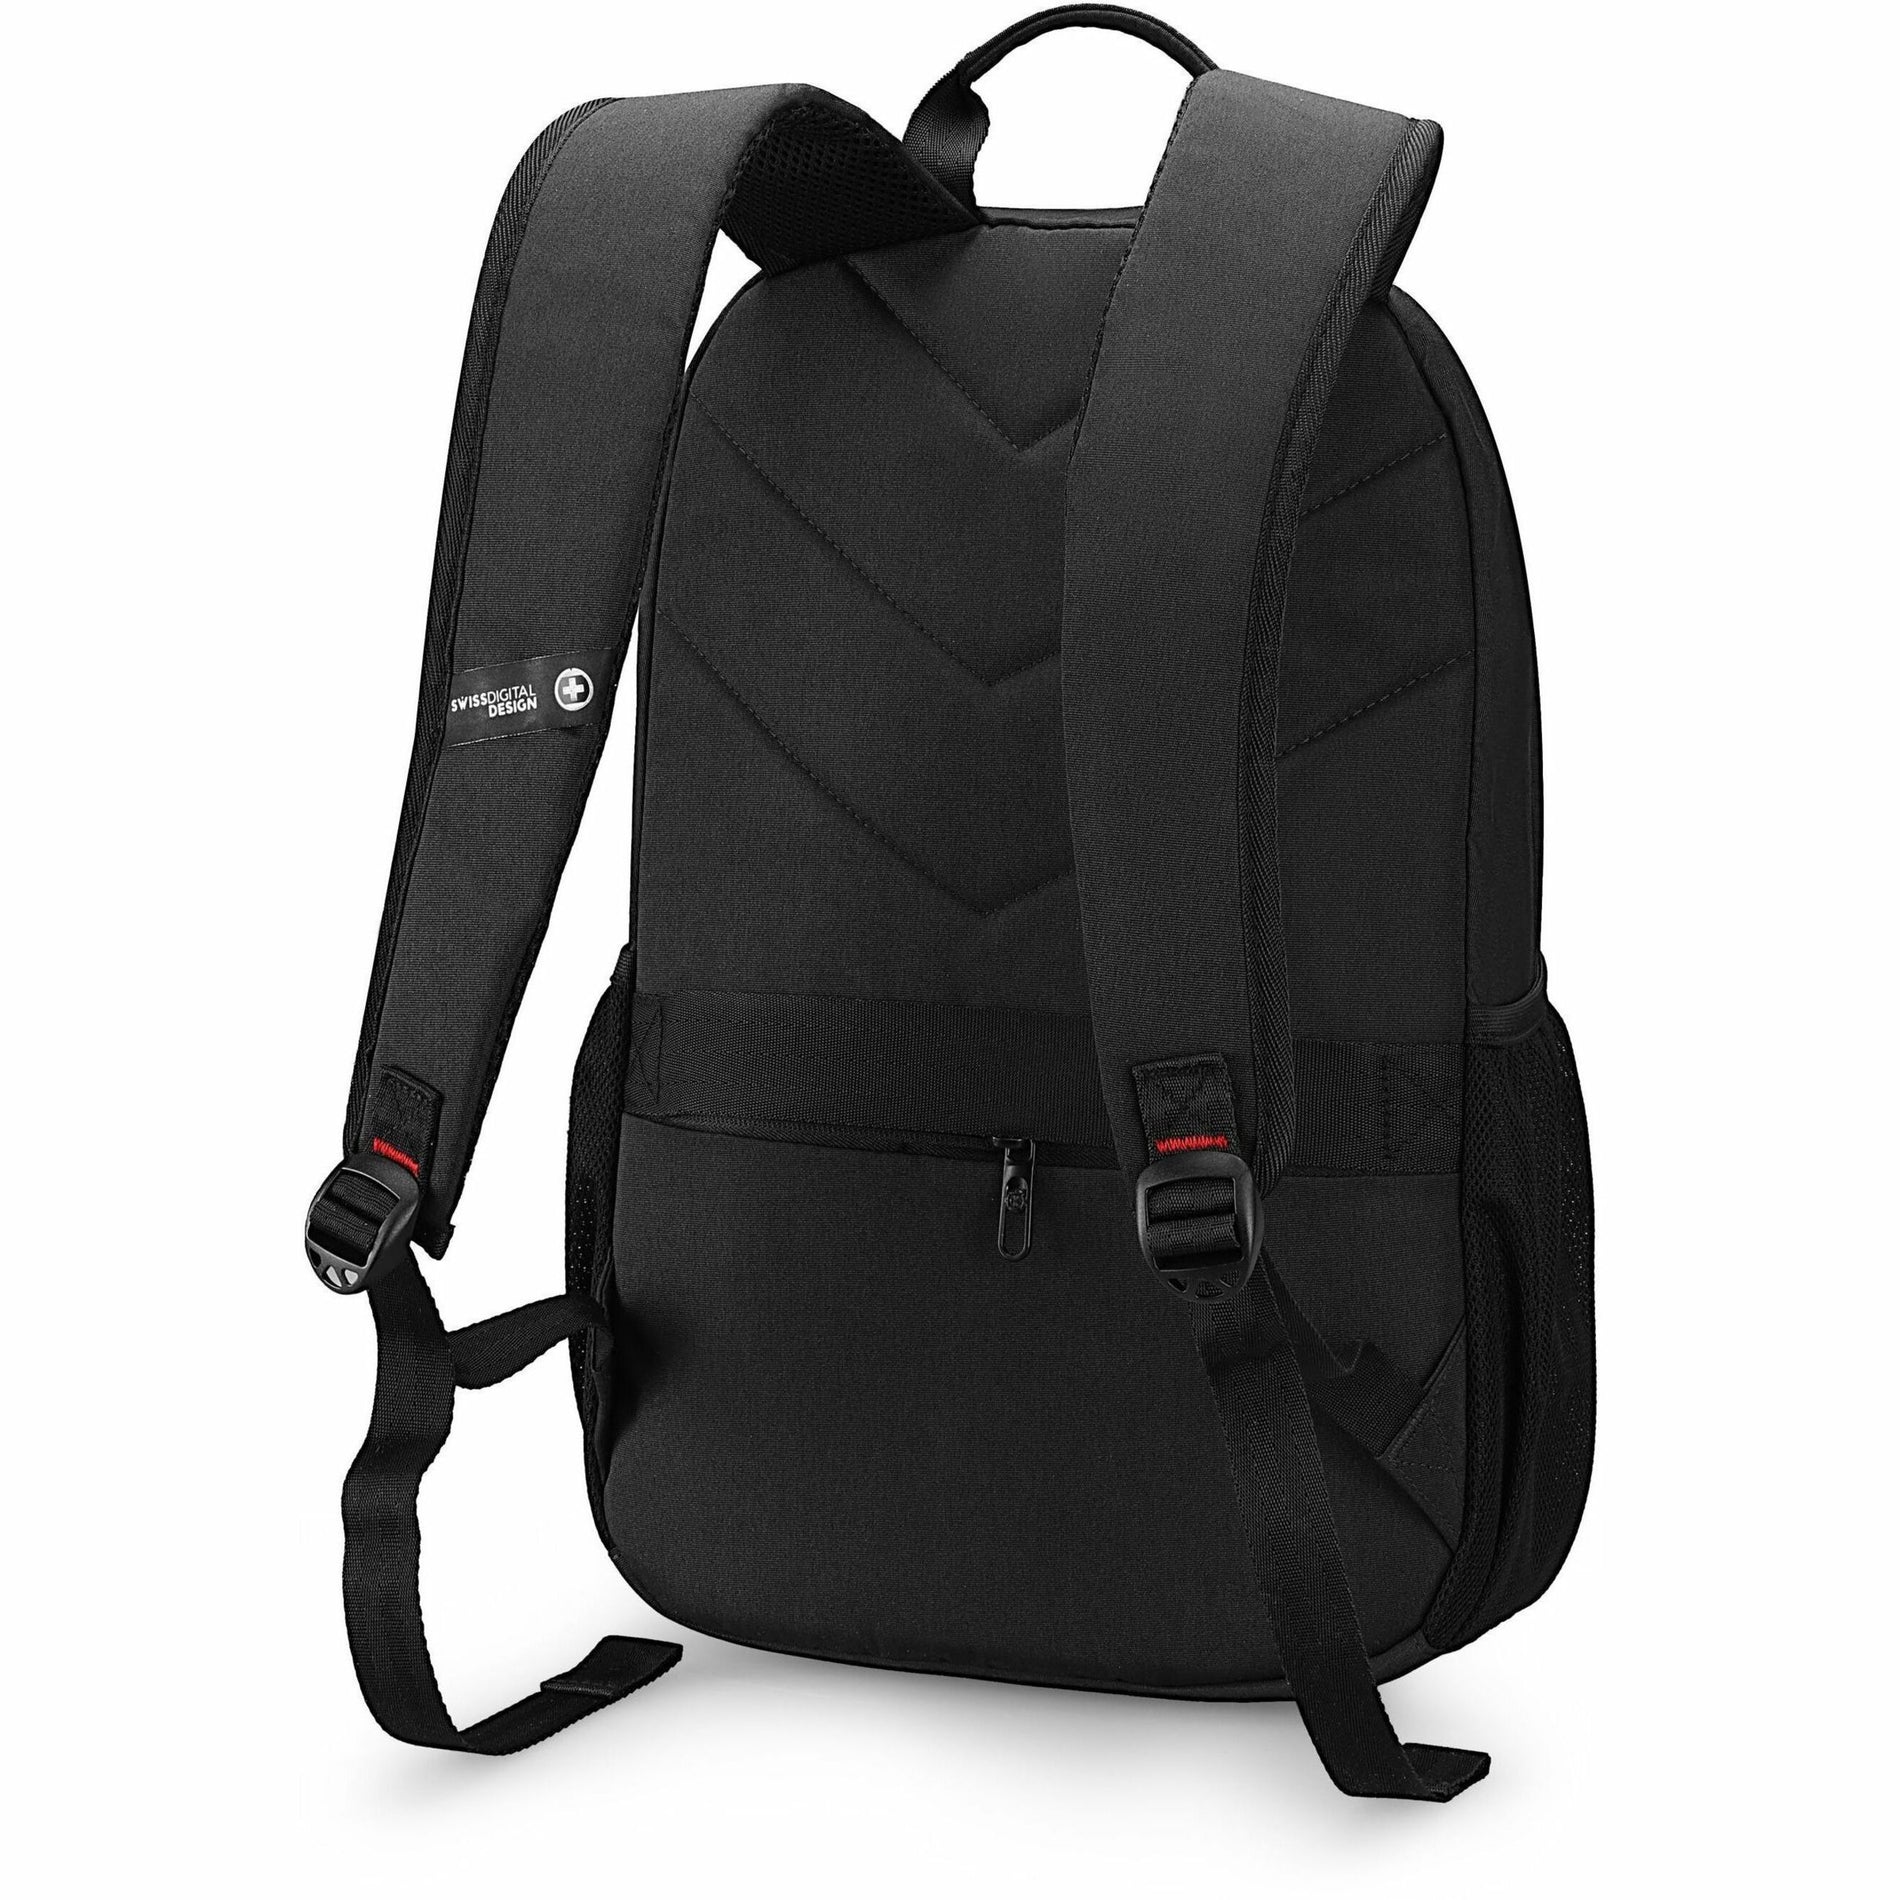 Swissdigital Design SD1634-01 Notebook Case, Backpack Carrying Case, 4.50 gal Volume Capacity, 16" Laptop Compartment, RFID Resistant, Water Resistant, Black